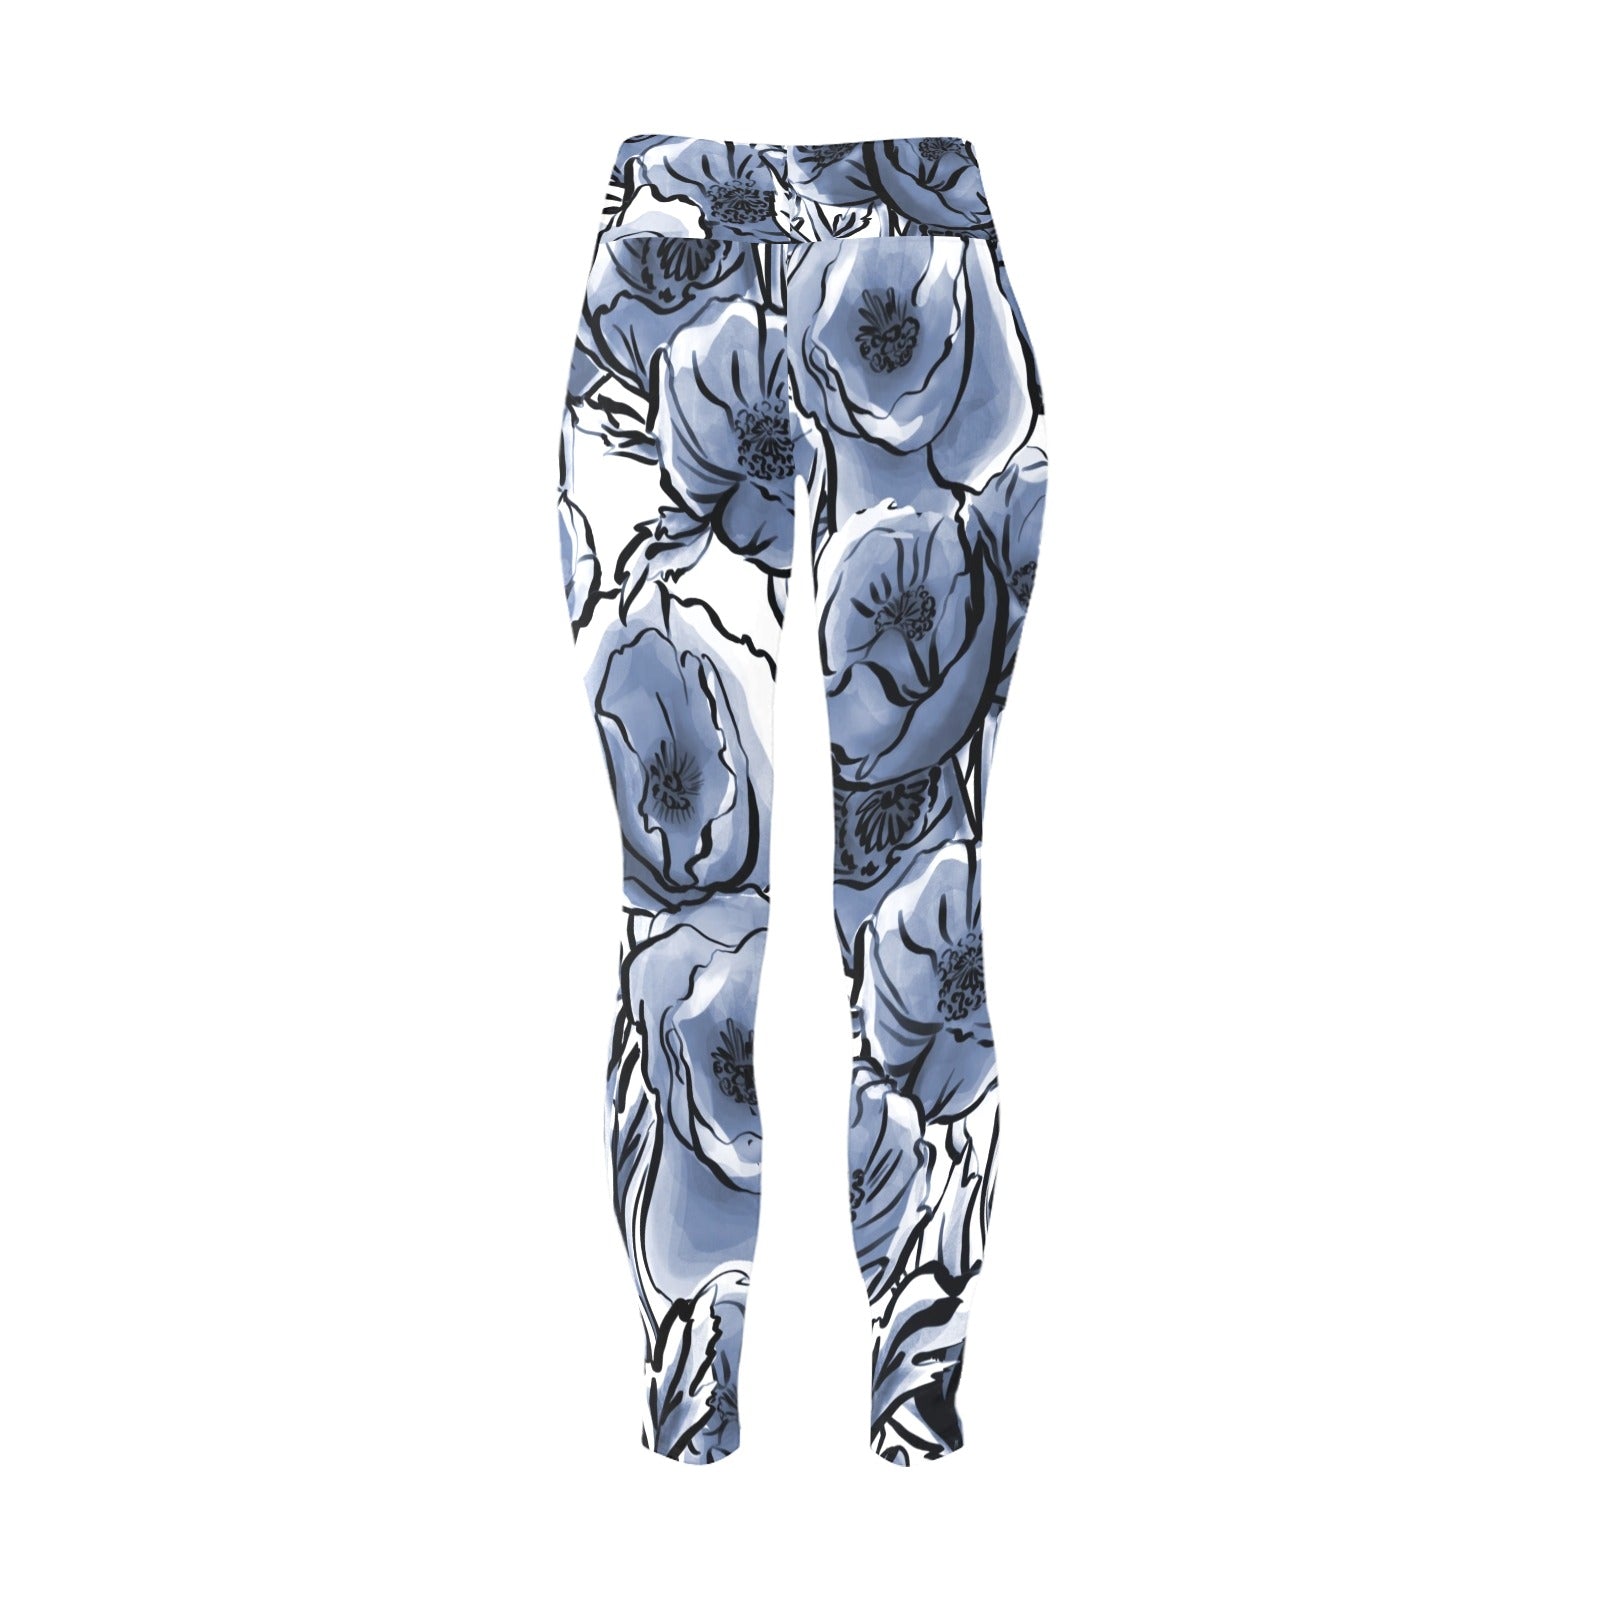 Blue And White Floral - Women's Plus Size High Waist Leggings Women's Plus Size High Waist Leggings